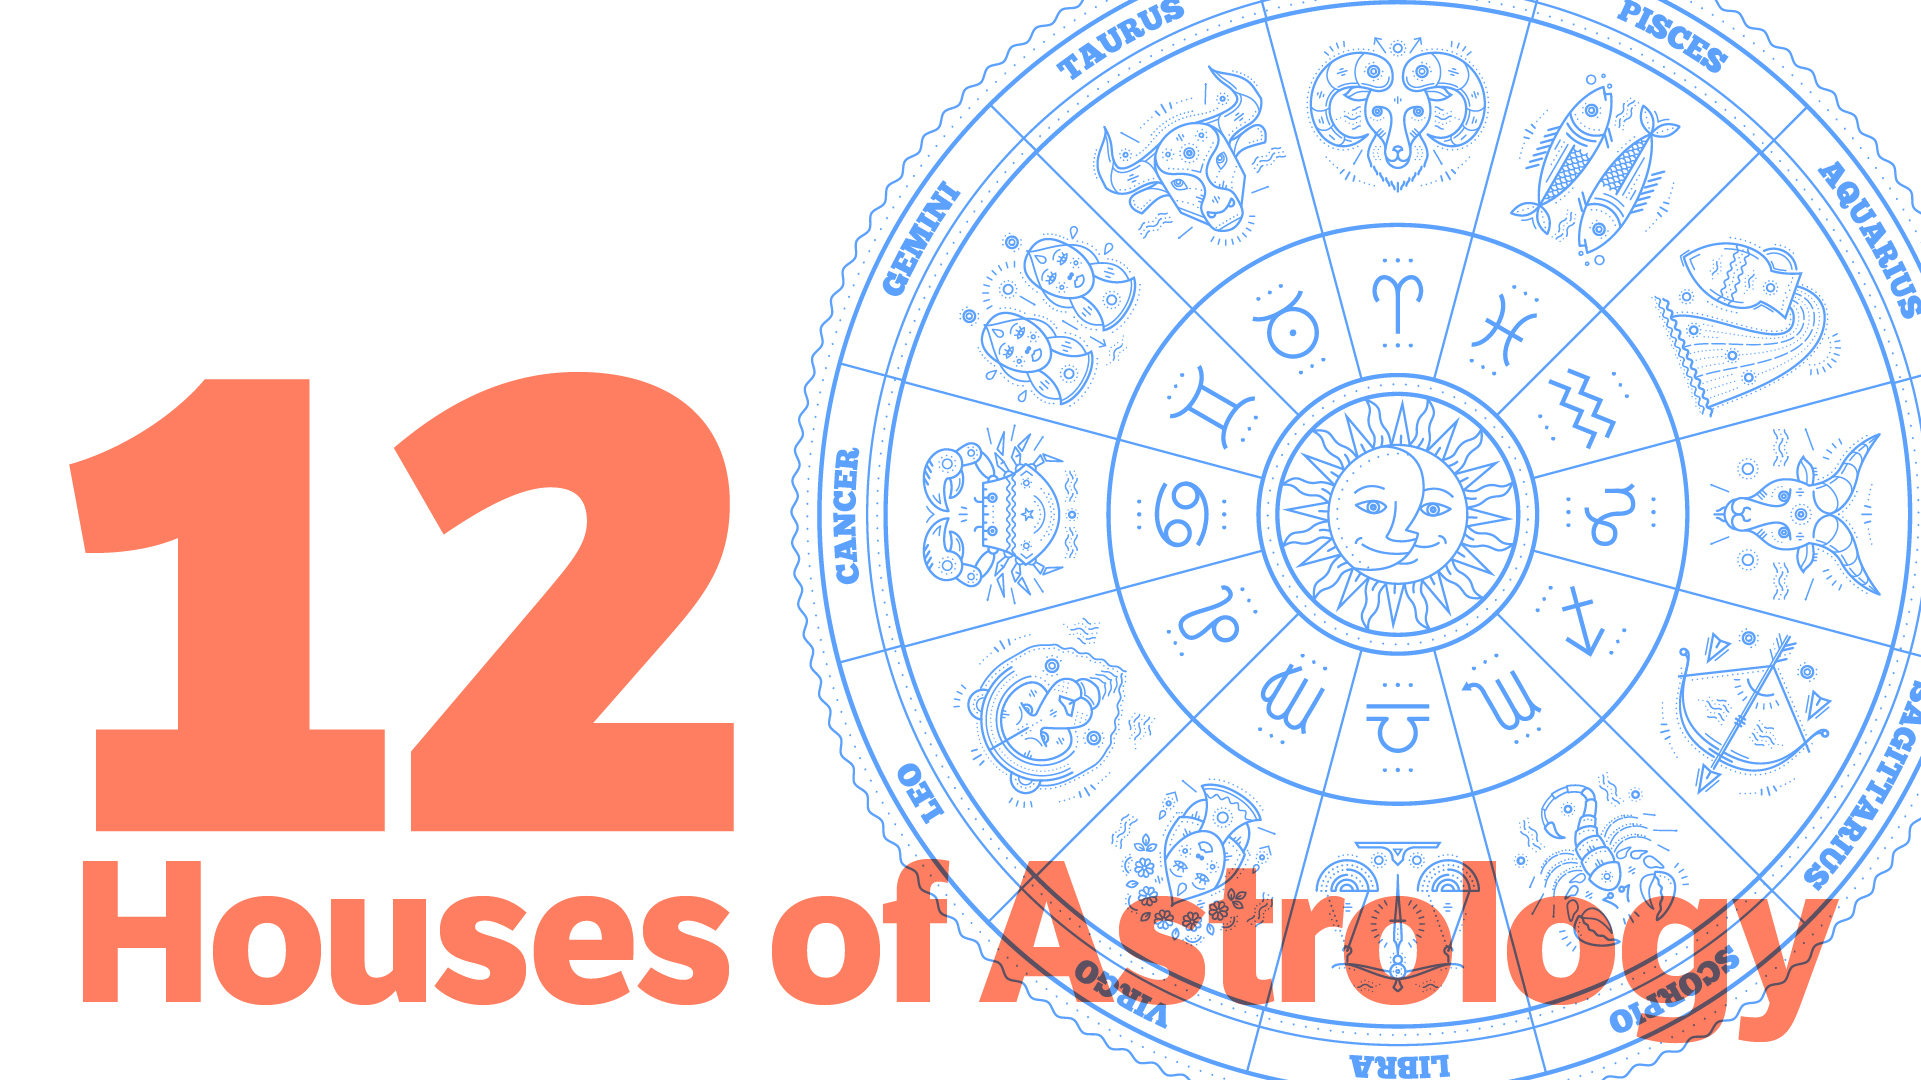 What Do The 12 Houses Mean In Astrology?